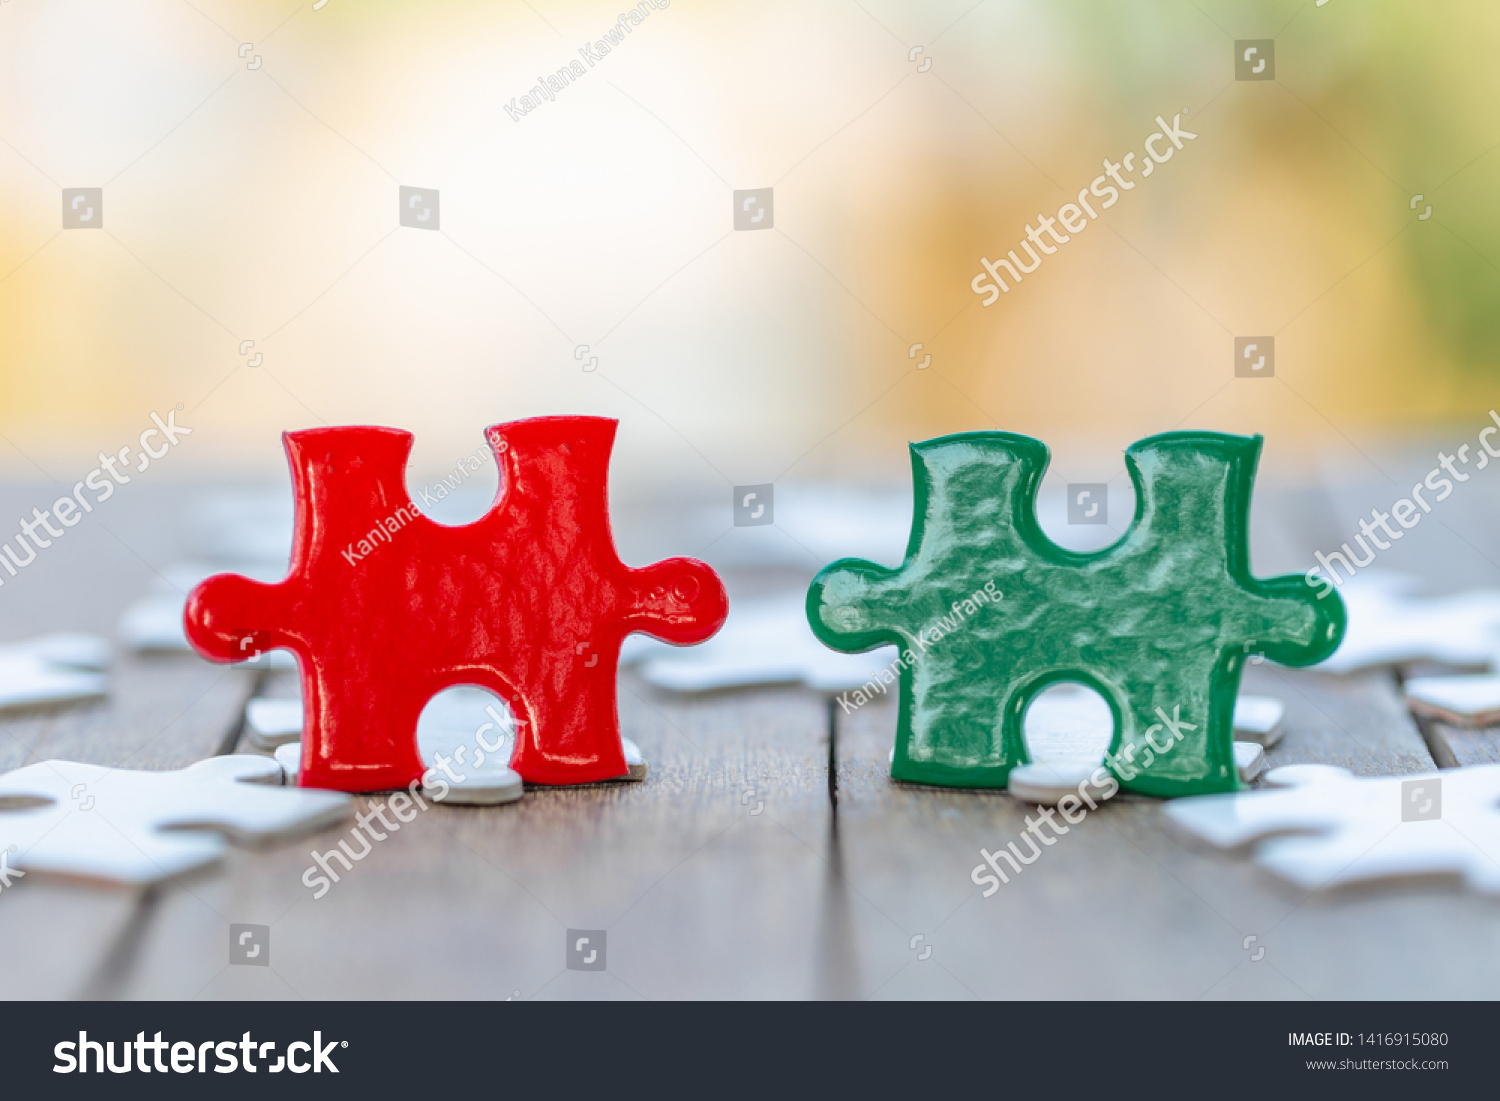 jigsaw puzzle and represent team support and help concept. business thinking.Concept business, teamwork and cooperation, strategy, cooperation. #1416915080